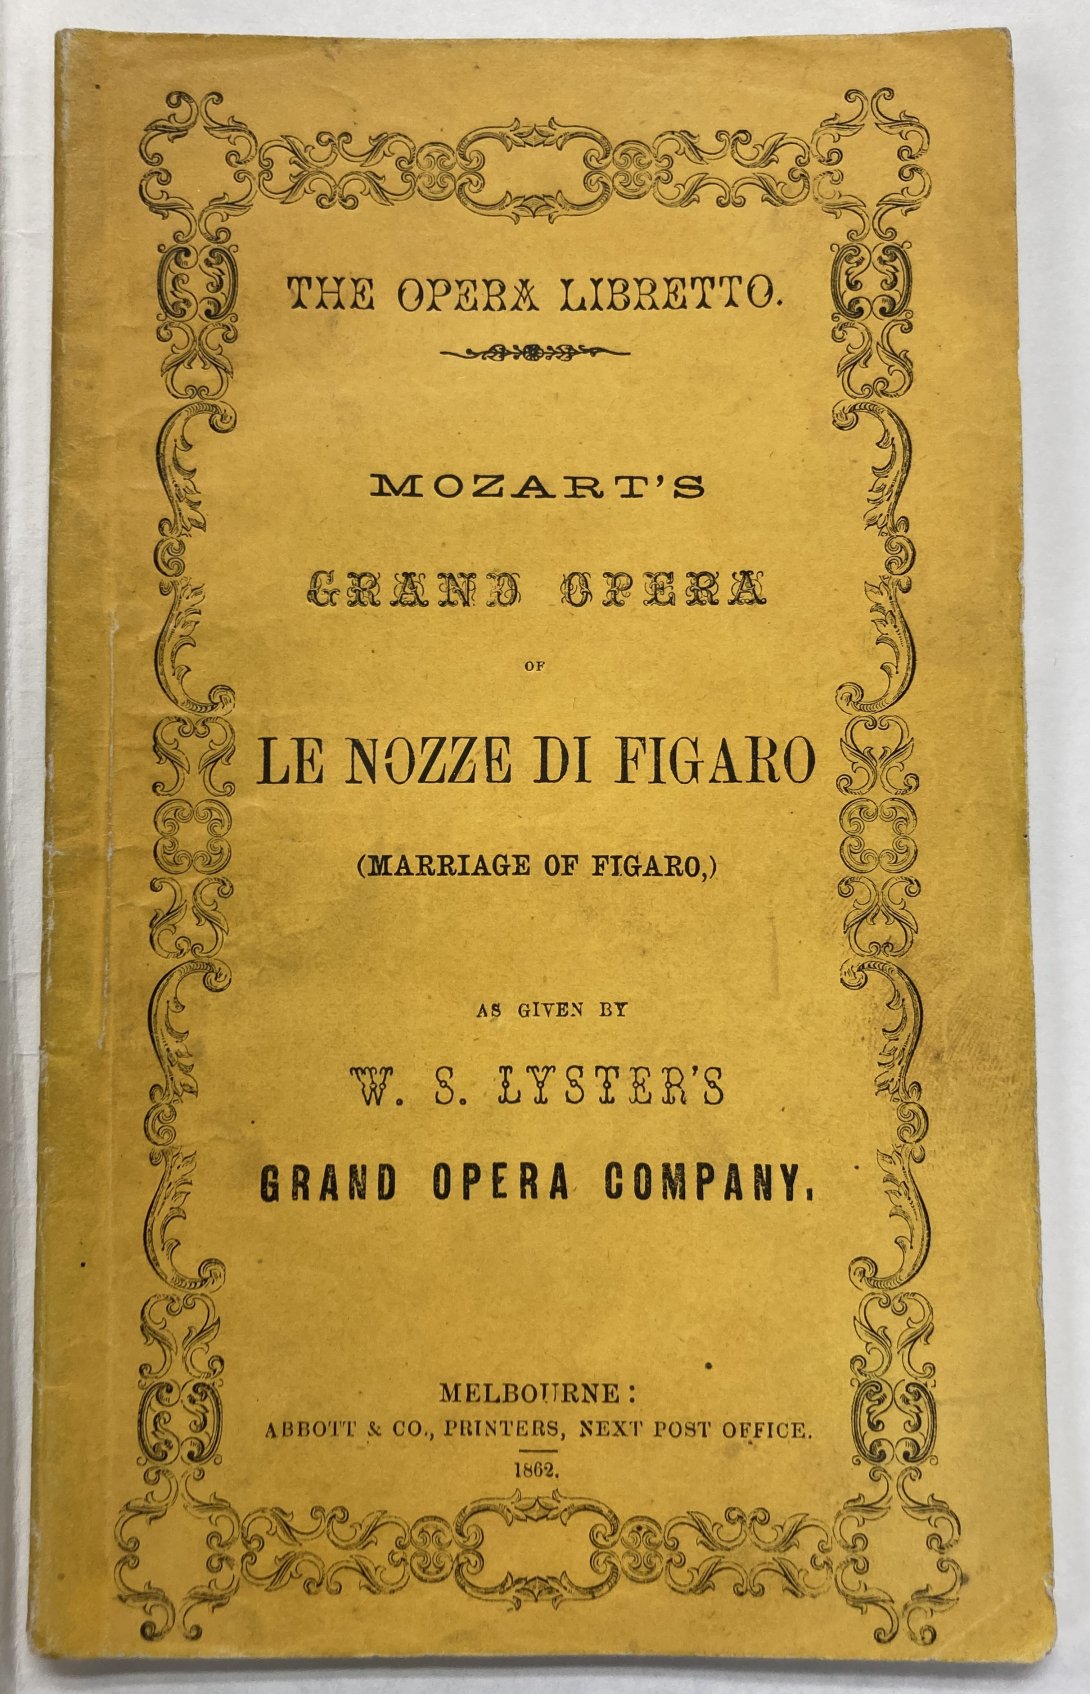 Image of a yellow booklet, a libretto, dating from the 1860s